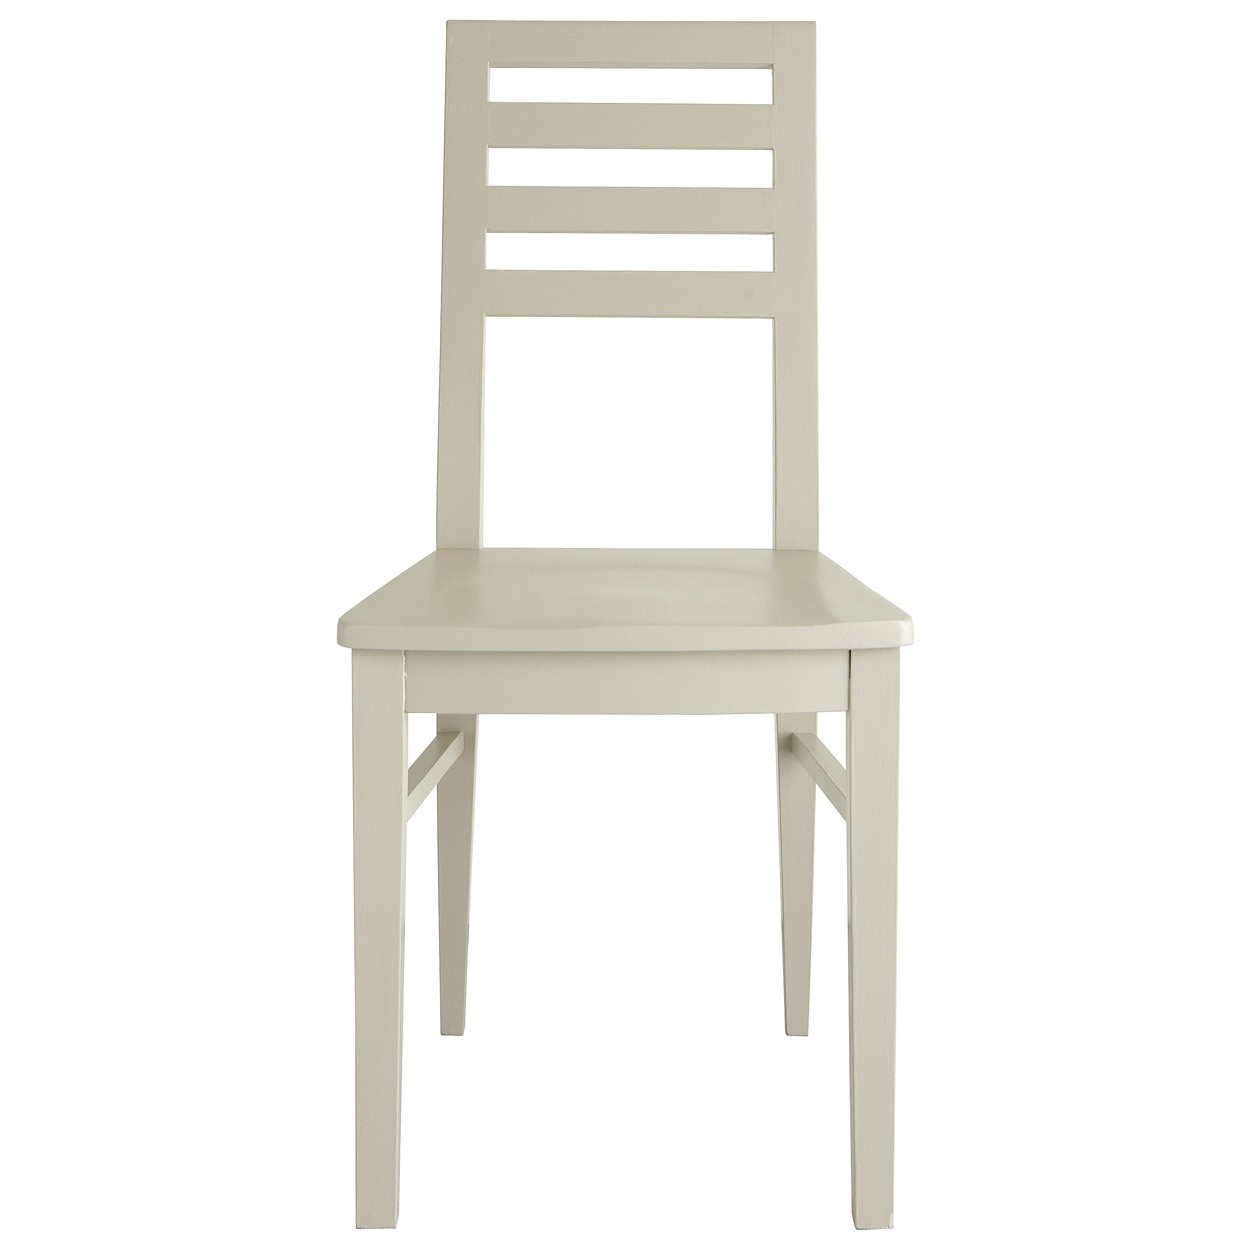 Child's Ladderback Chair - Taupe